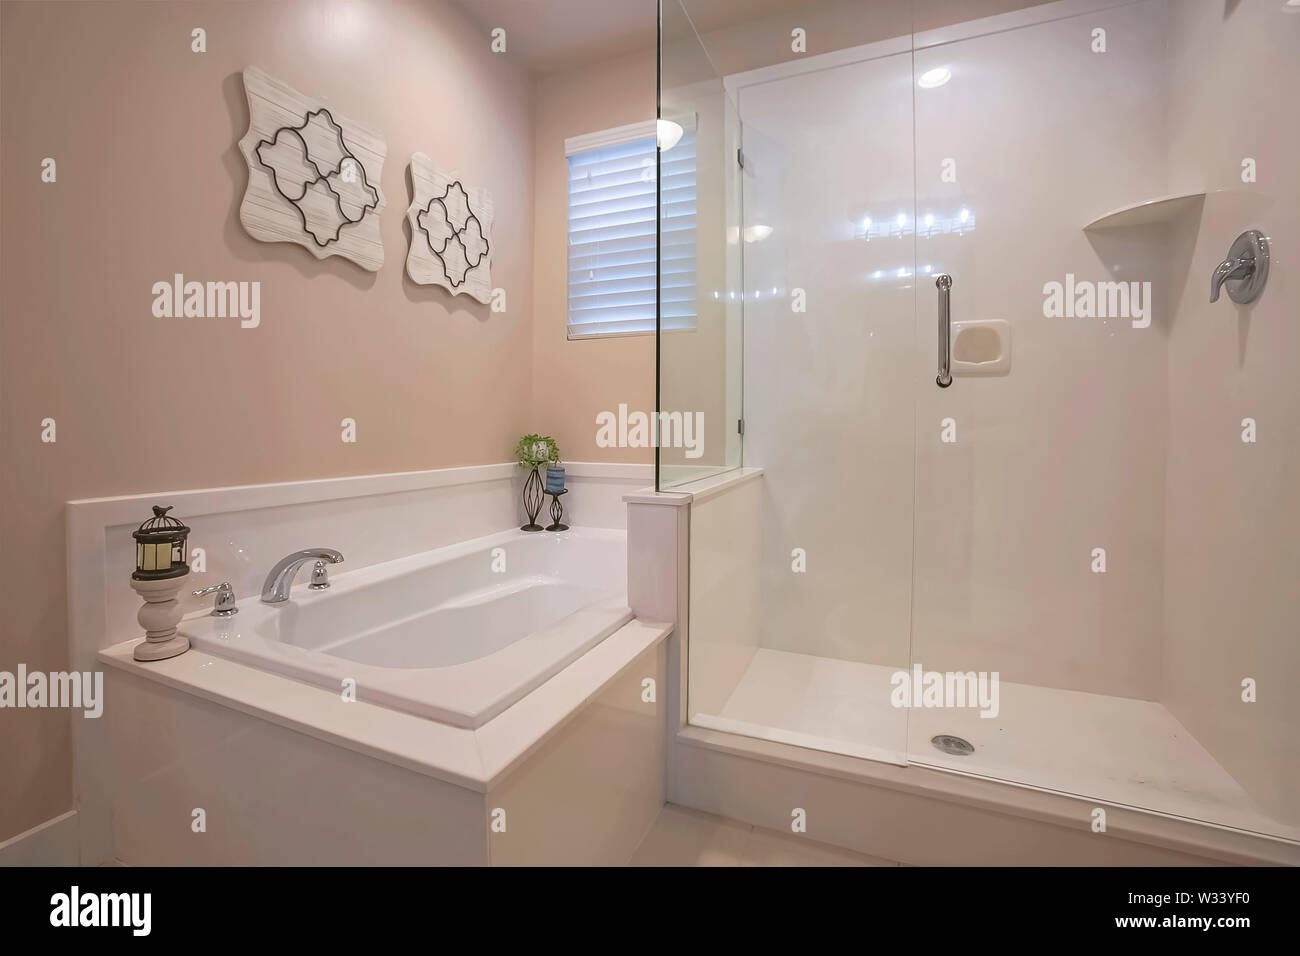 Bathroom Interior With A Polished Built In Bathtub And Shower Stall.  Candles, Wall Decorations, And Window With Blinds Can Also Be Seen Inside  The Roo Stock Photo - Alamy